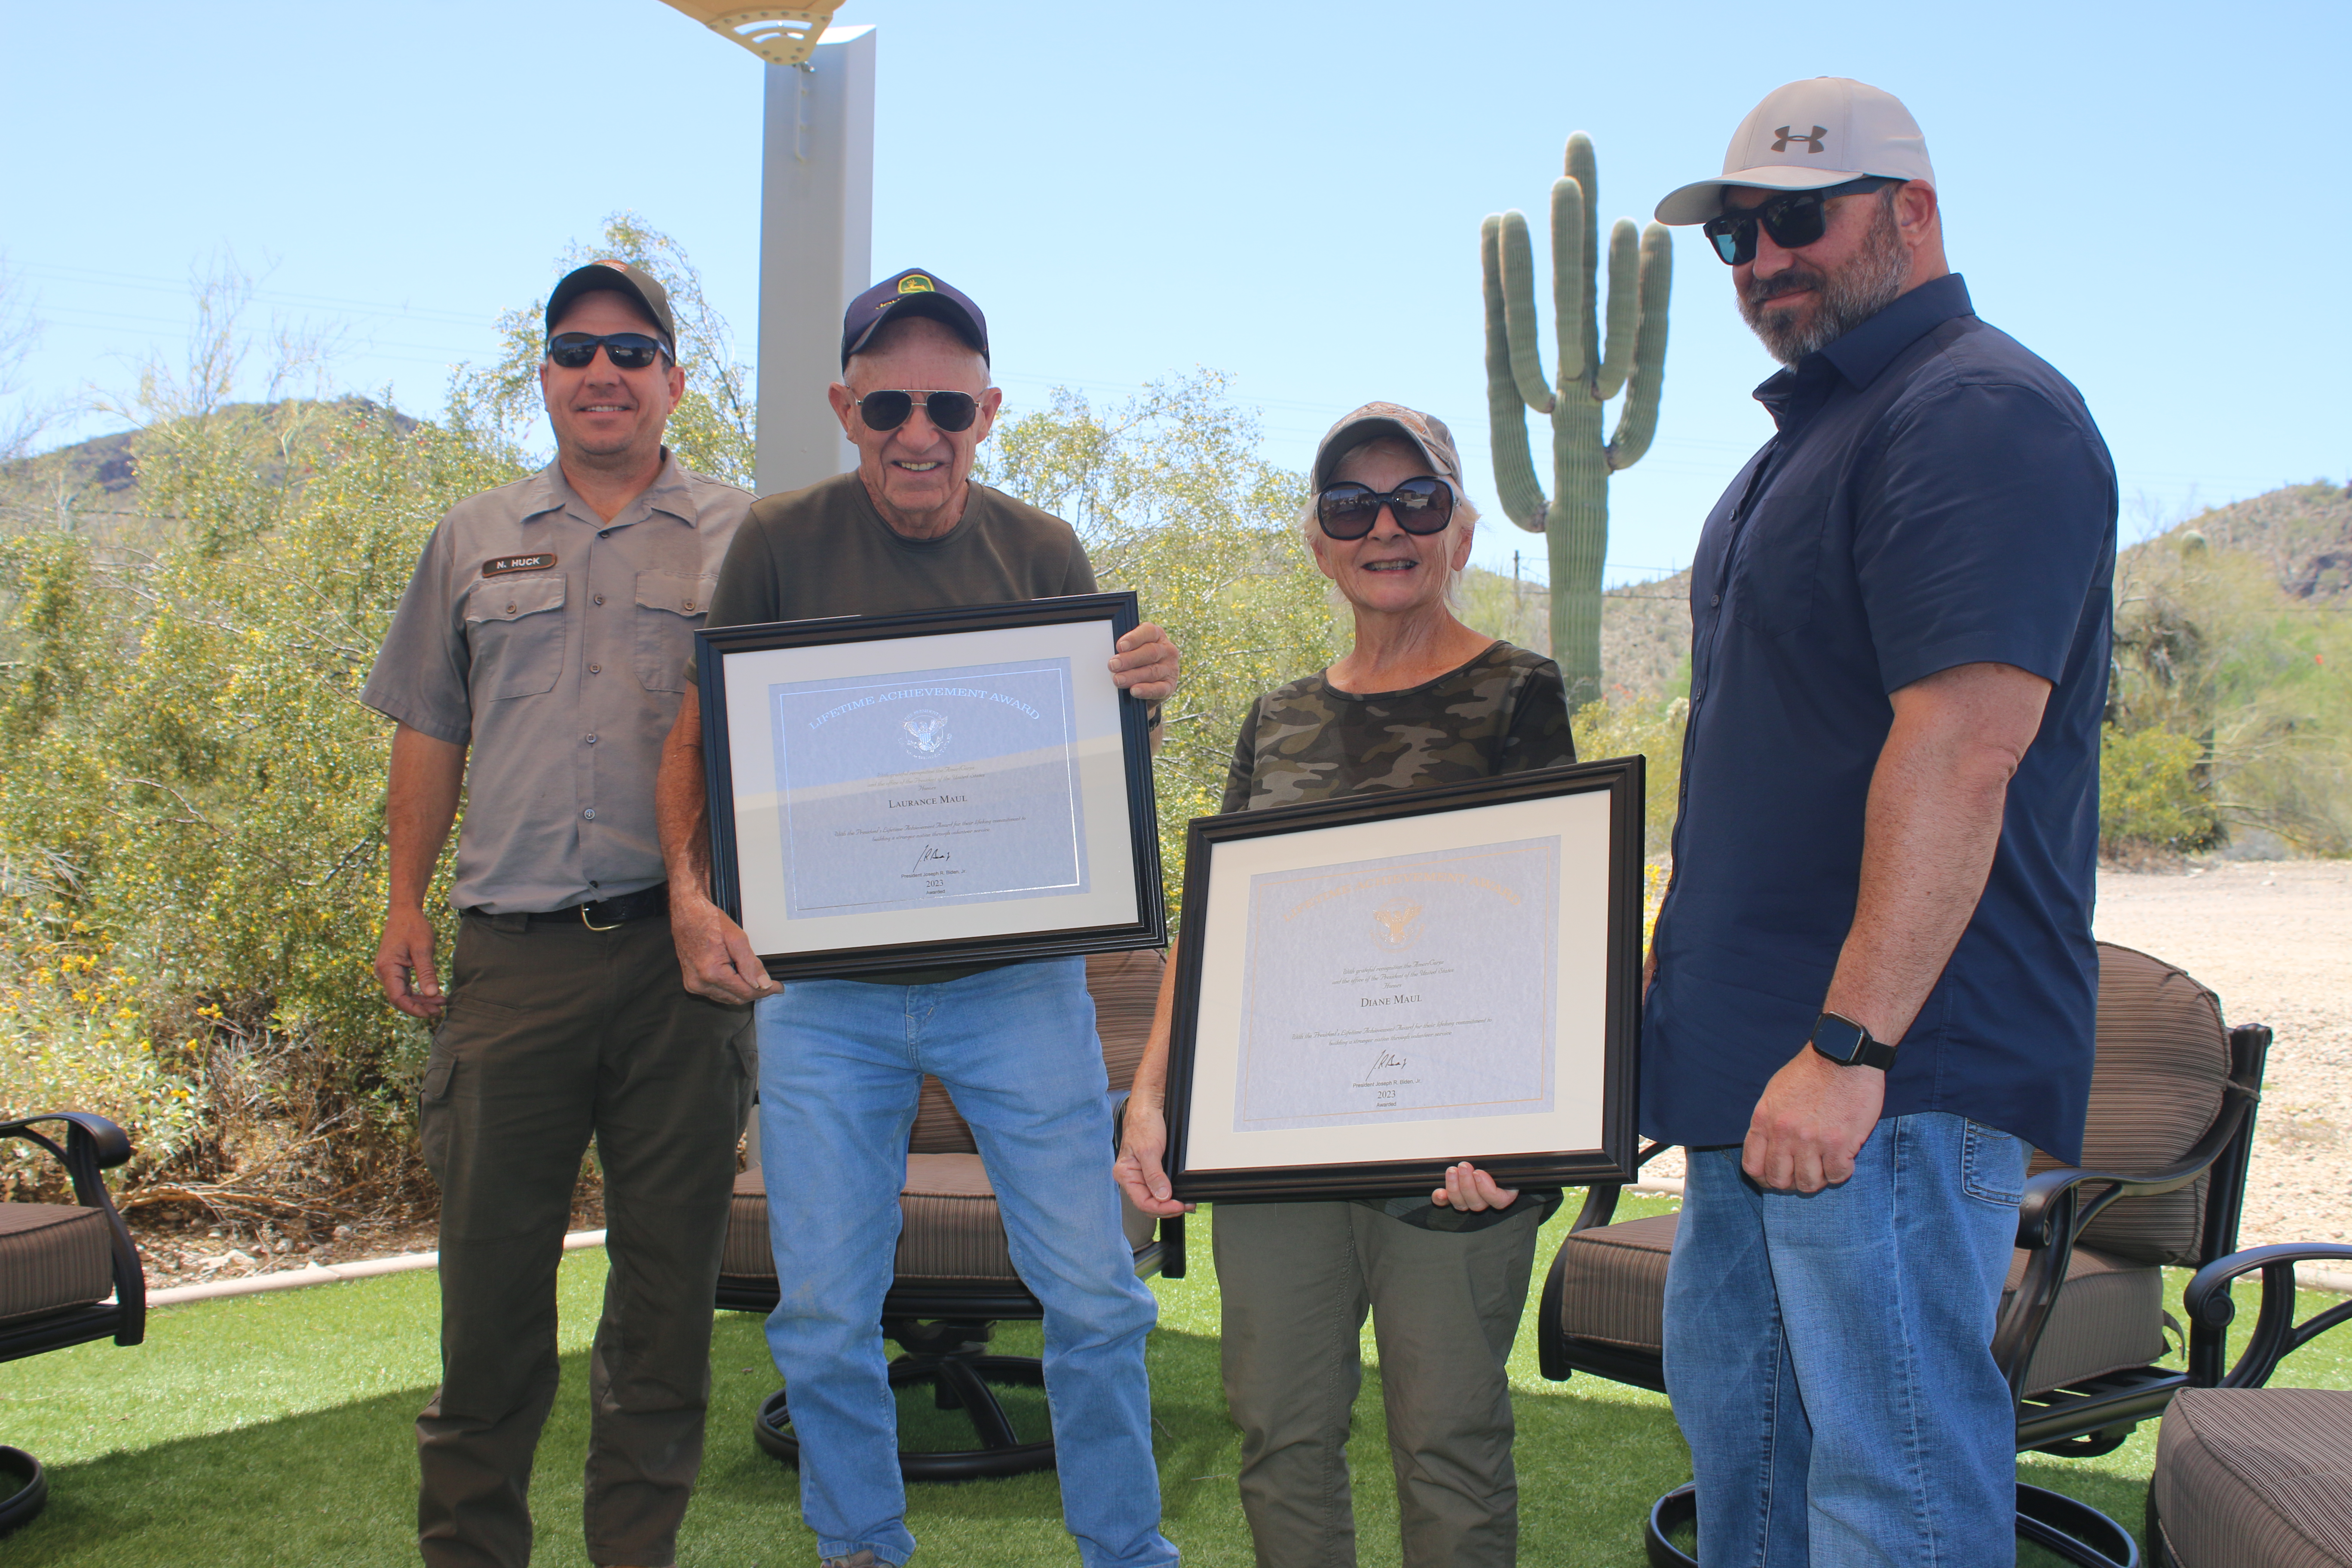 Acting Superintendent Nick Huck and Senior Law Enforcement Ranger Kyle Greene presented Laurence and Diane Maul with the President’s Volunteer Service Lifetime Achievement Award